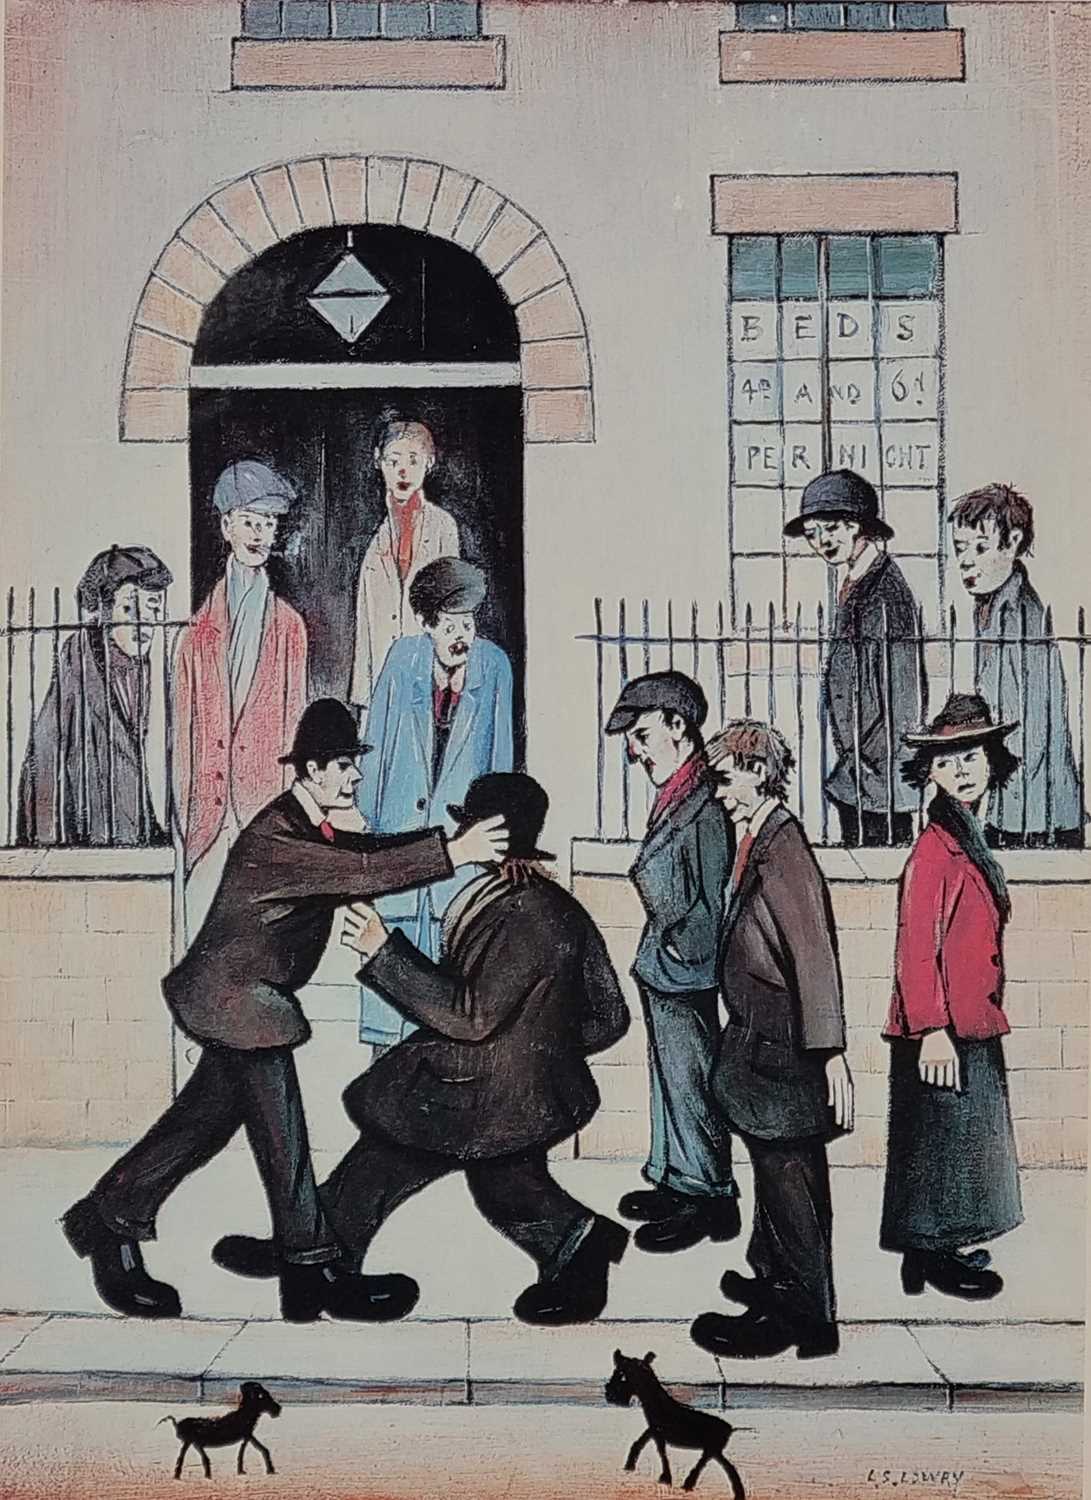 ƚ Laurence Stephen LOWRY (British 1887-1976) A Fight, Salford, Giclée print, titled on label - Image 10 of 12